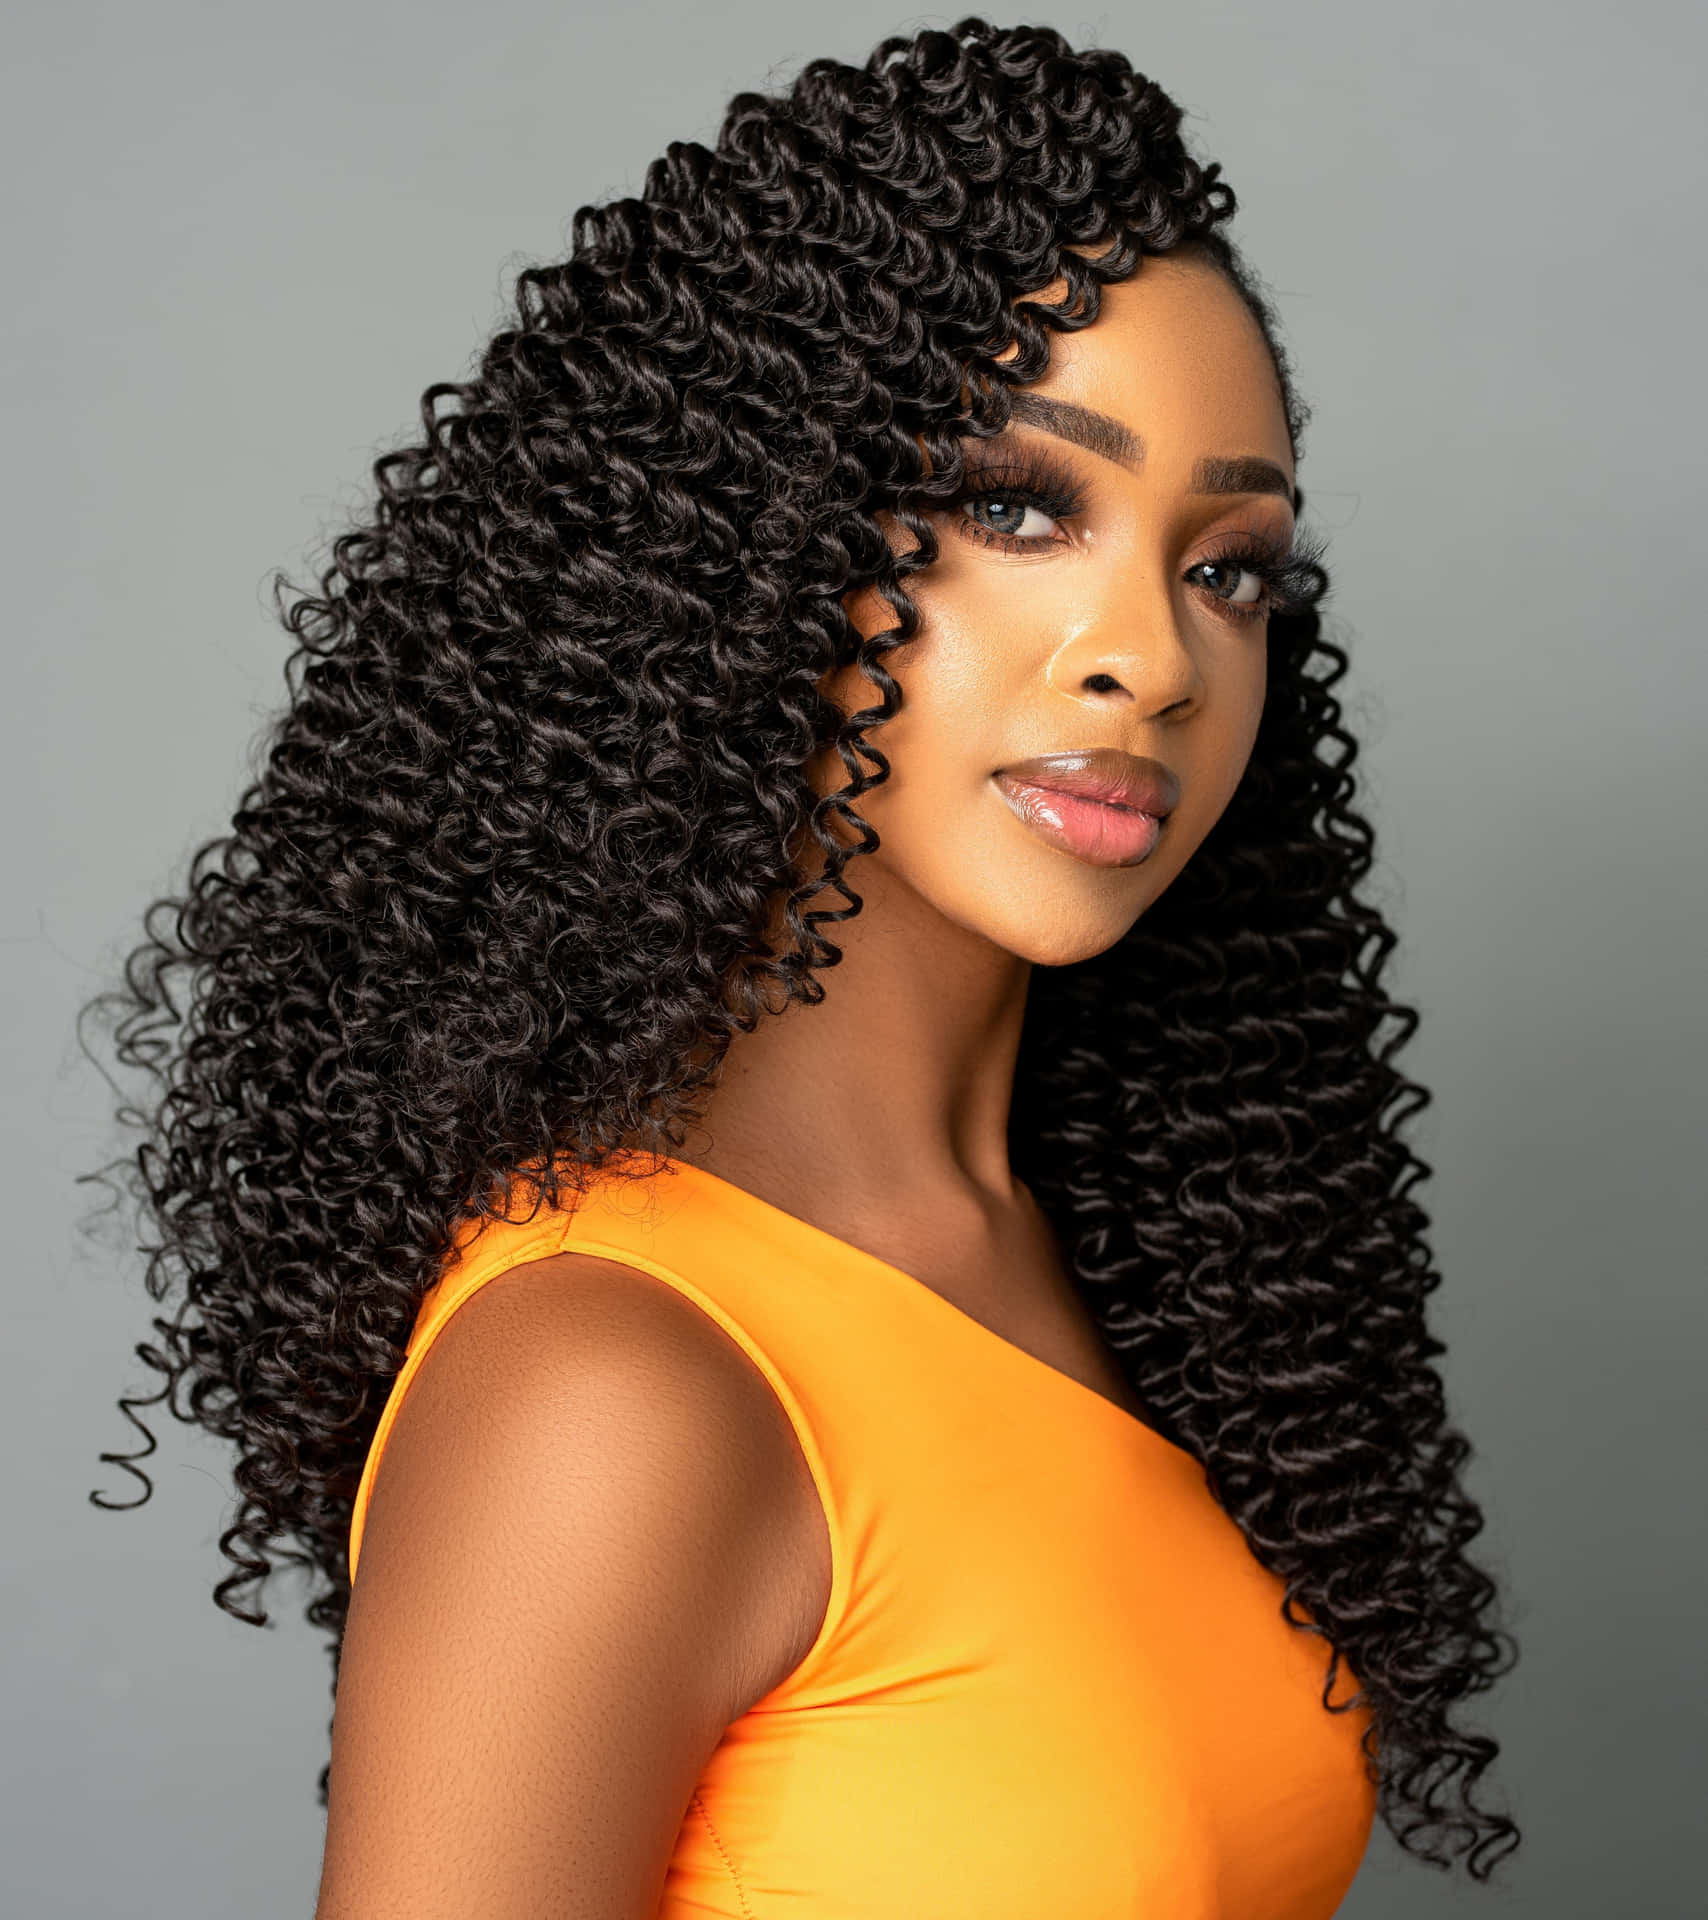 Download Crochet Hair Styles Pictures 3998 X 4495 | Wallpapers.com